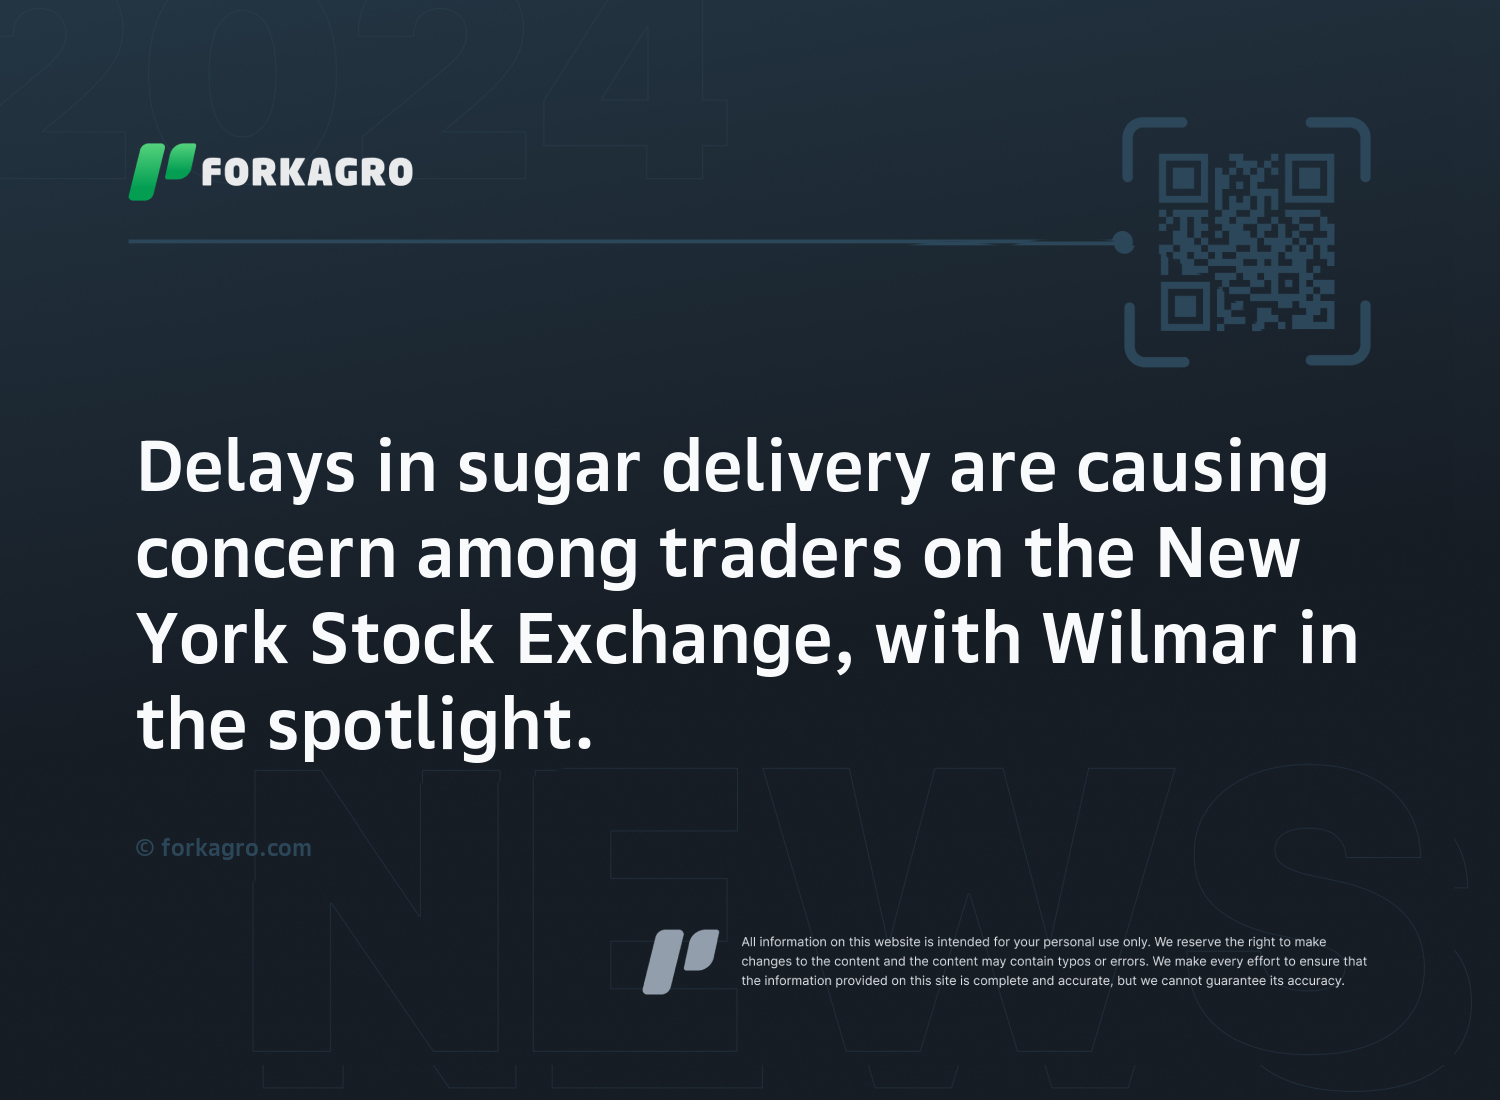 Delays in sugar delivery are causing concern among traders on the New York Stock Exchange, with Wilmar in the spotlight.